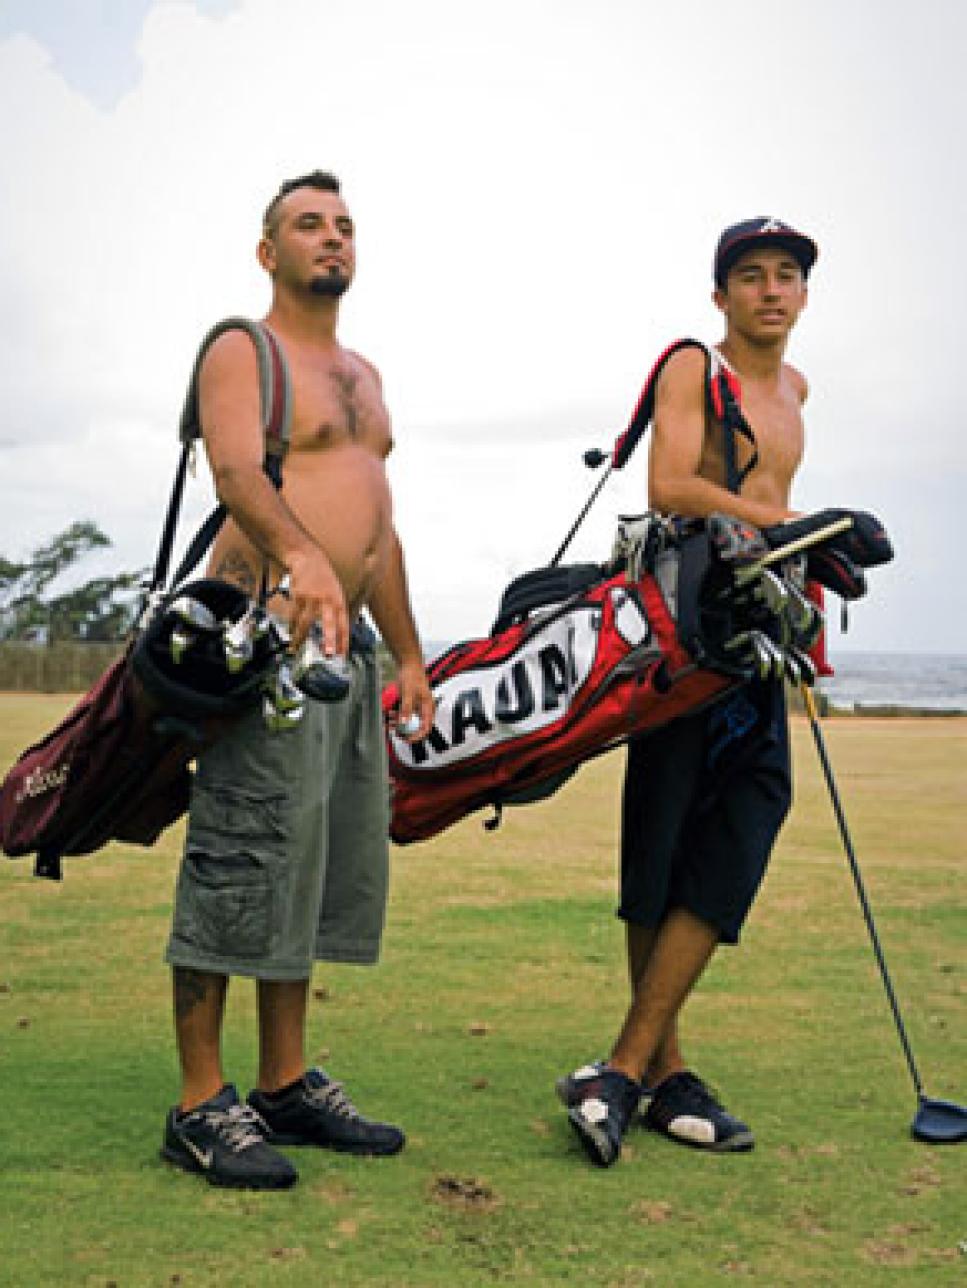 Mikael swinging nude on exclusive Hills golf course - YouTube